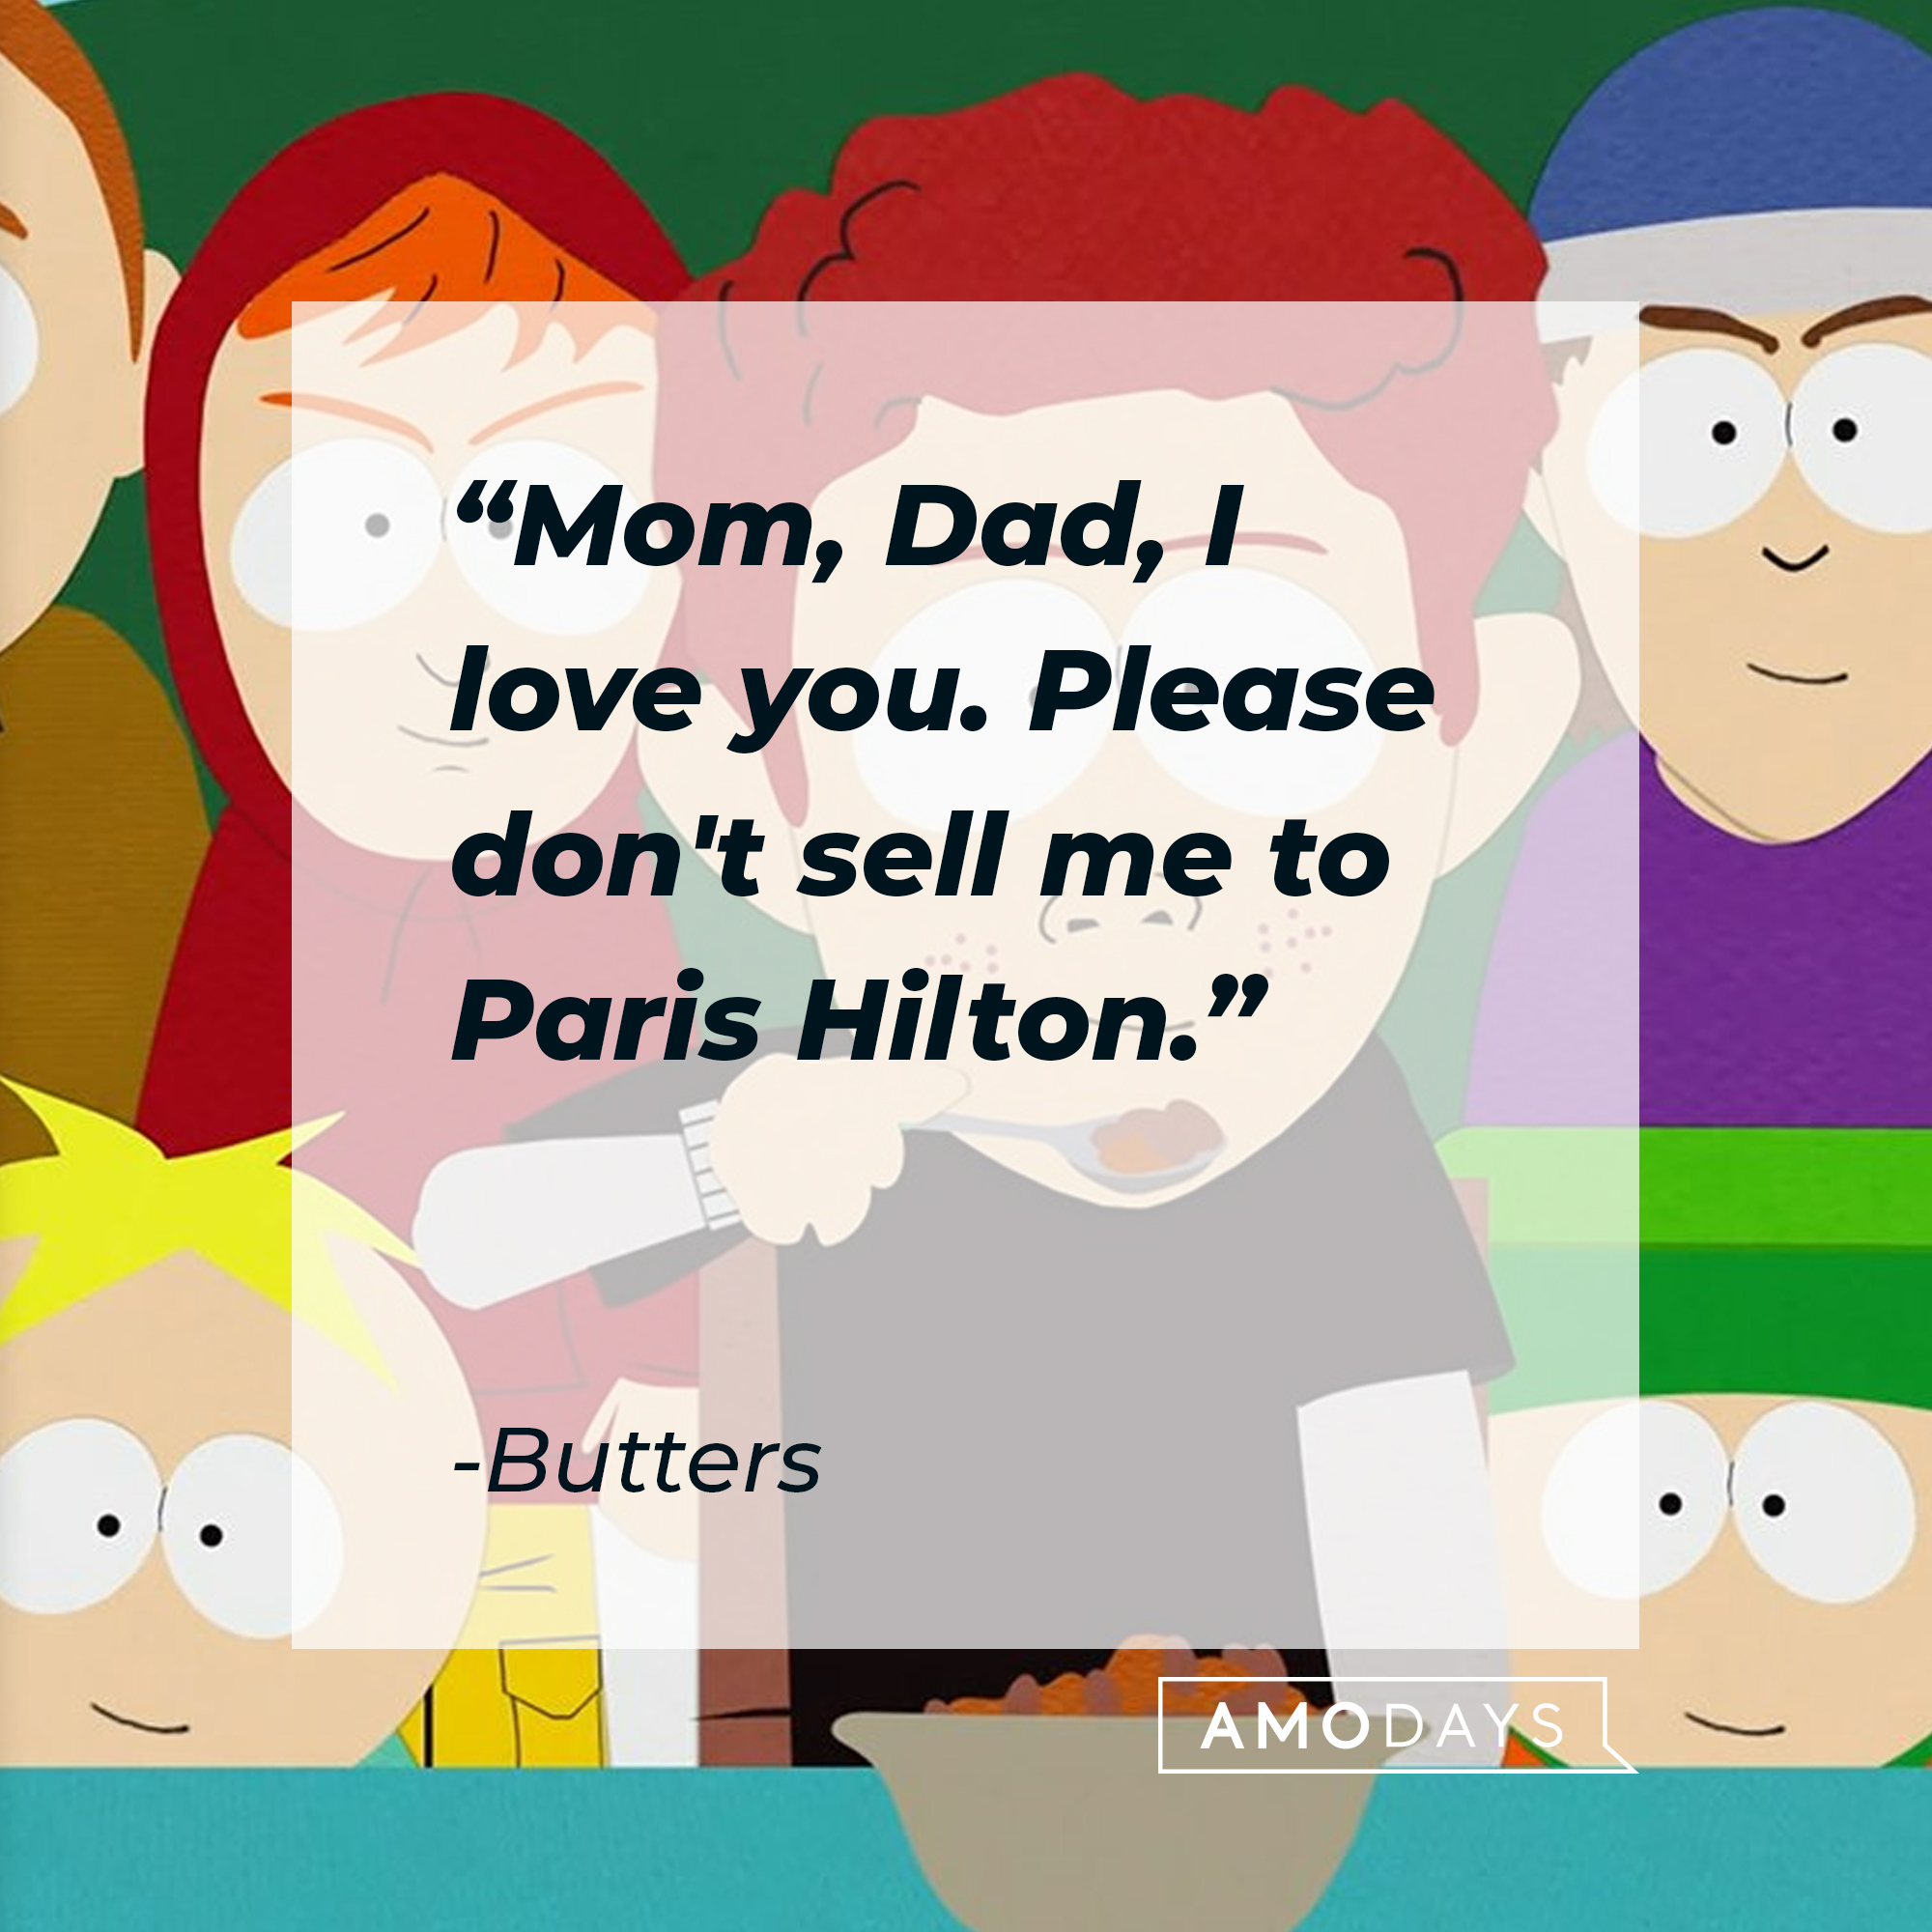 Butters' quote: "Mom, Dad, I love you. Please don't sell me to Paris Hilton." | Source: facebook.com/southpark